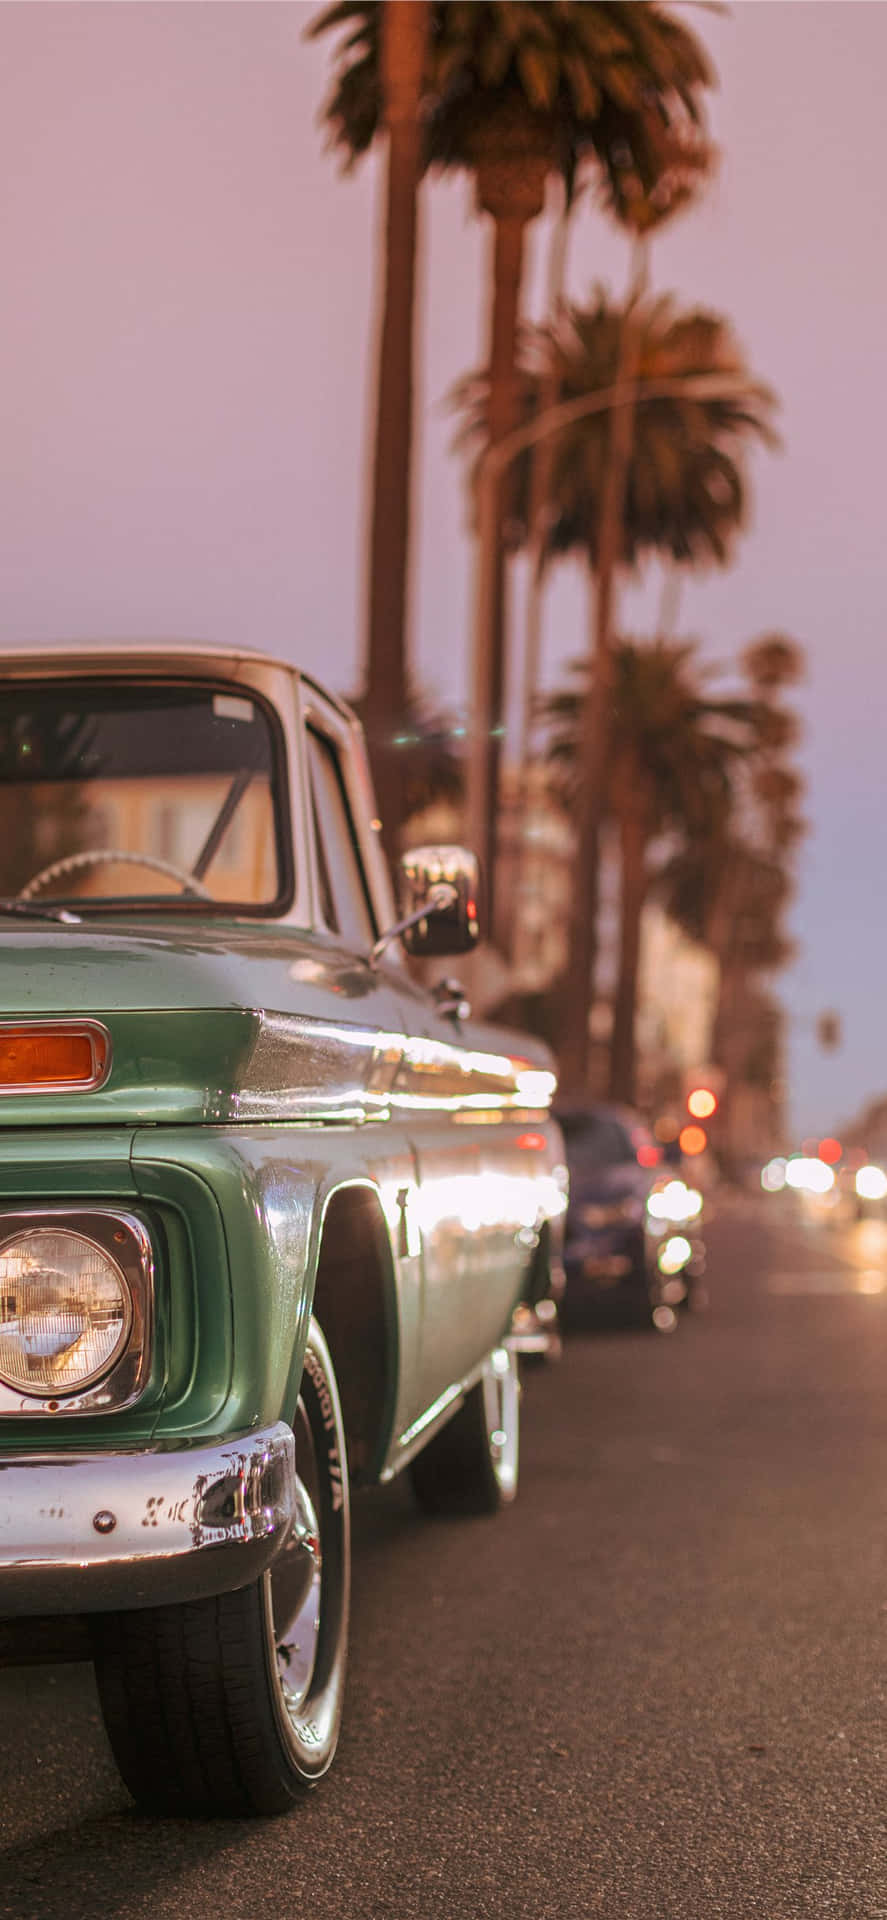 The Open Road to Exploration in a Vintage Car Wallpaper